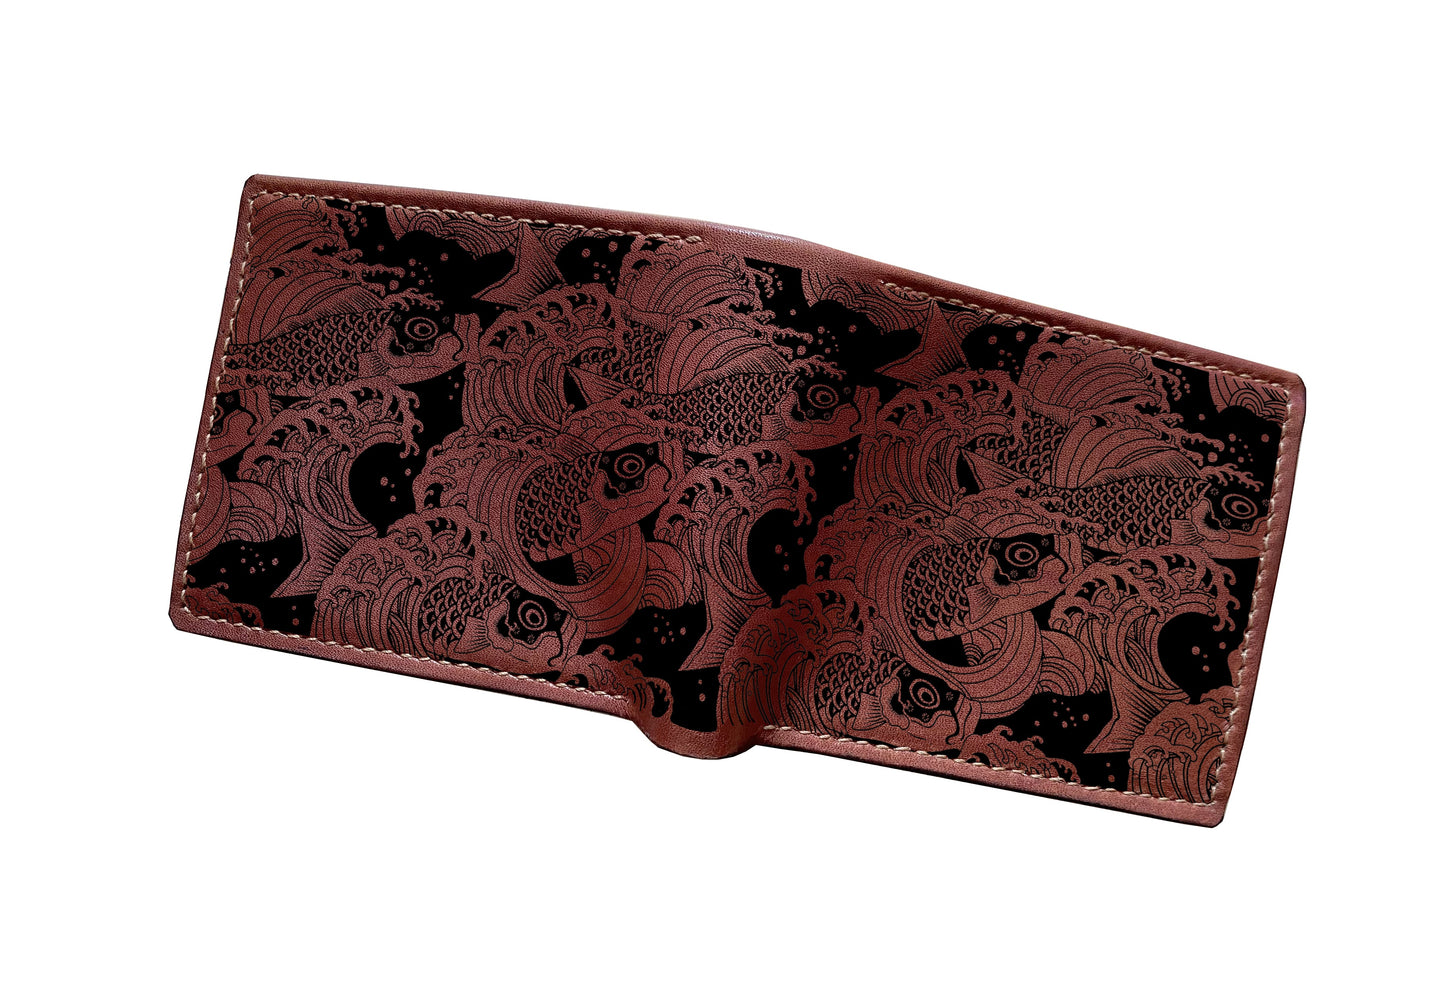 Mayan Corner - Koi fish minimalist design wallet, bifold leather wallet, japanese style leather gift for dad, husband, brother